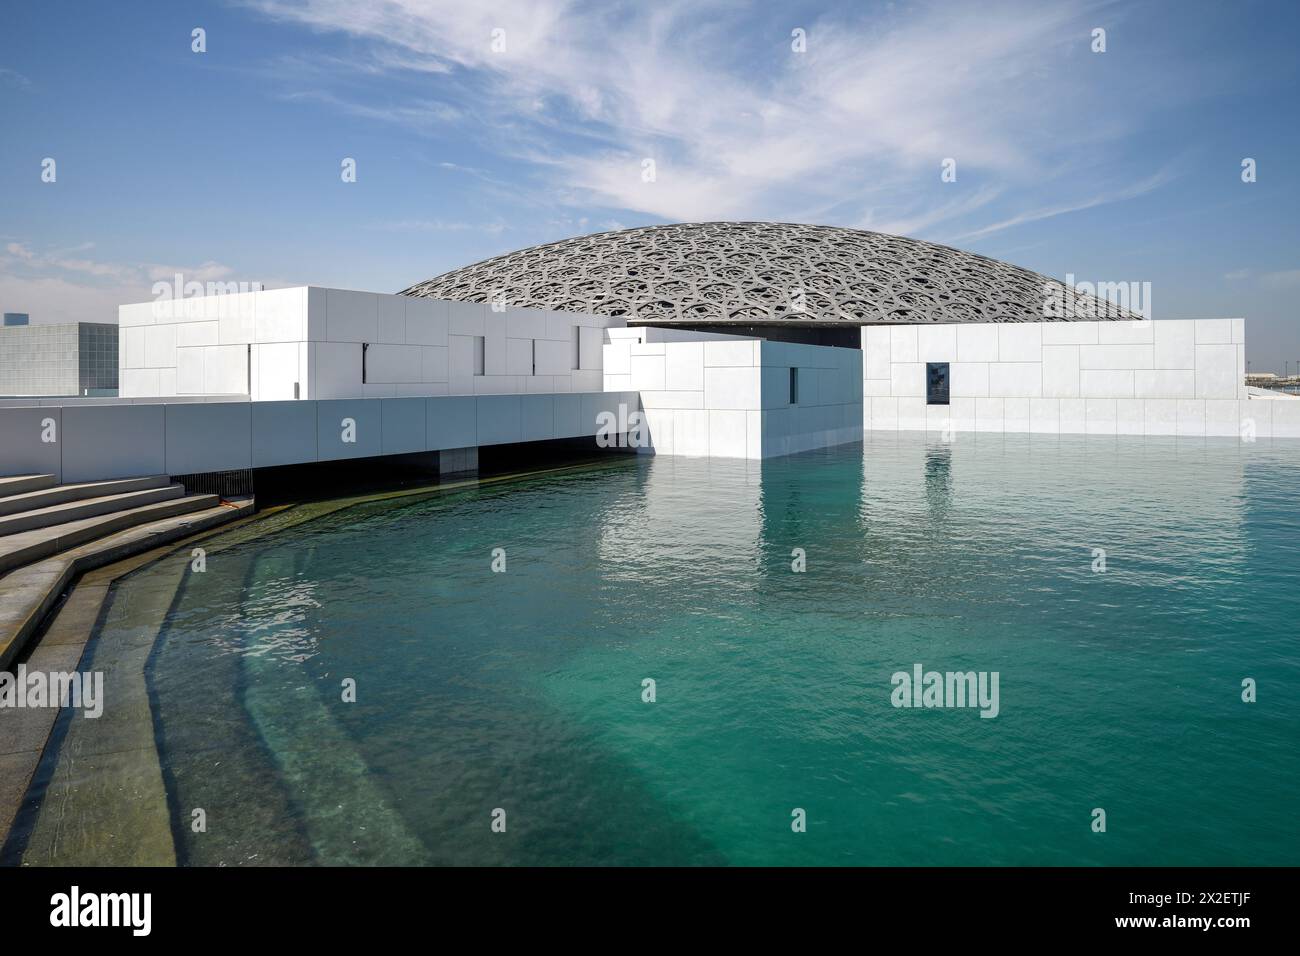 Géographie / voyage, Émirats arabes Unis, Abou Dhabi, Louvre Abou Dhabi, ADDITIONAL-RIGHTS-LEARANCE-INFO-NOT-AVAILABLE Banque D'Images